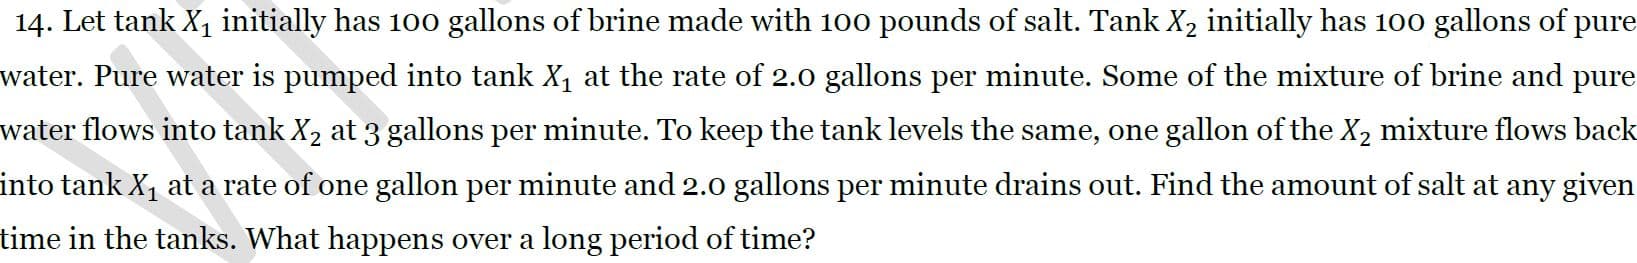 14. Let tank X, initially has 100 gallons of brine made with 100 pounds of salt. Tank X2 initially has 100 gallons of pure
water. Pure water is pumped into tank X, at the rate of 2.0 gallons per minute. Some of the mixture of brine and pure
water flows into tank X2 at 3 gallons per minute. To keep the tank levels the same, one gallon of the X2 mixture flows back
into tank X, at a rate of one gallon per minute and 2.0 gallons per minute drains out. Find the amount of salt at any given
time in the tanks. What happens over a long period of time?
